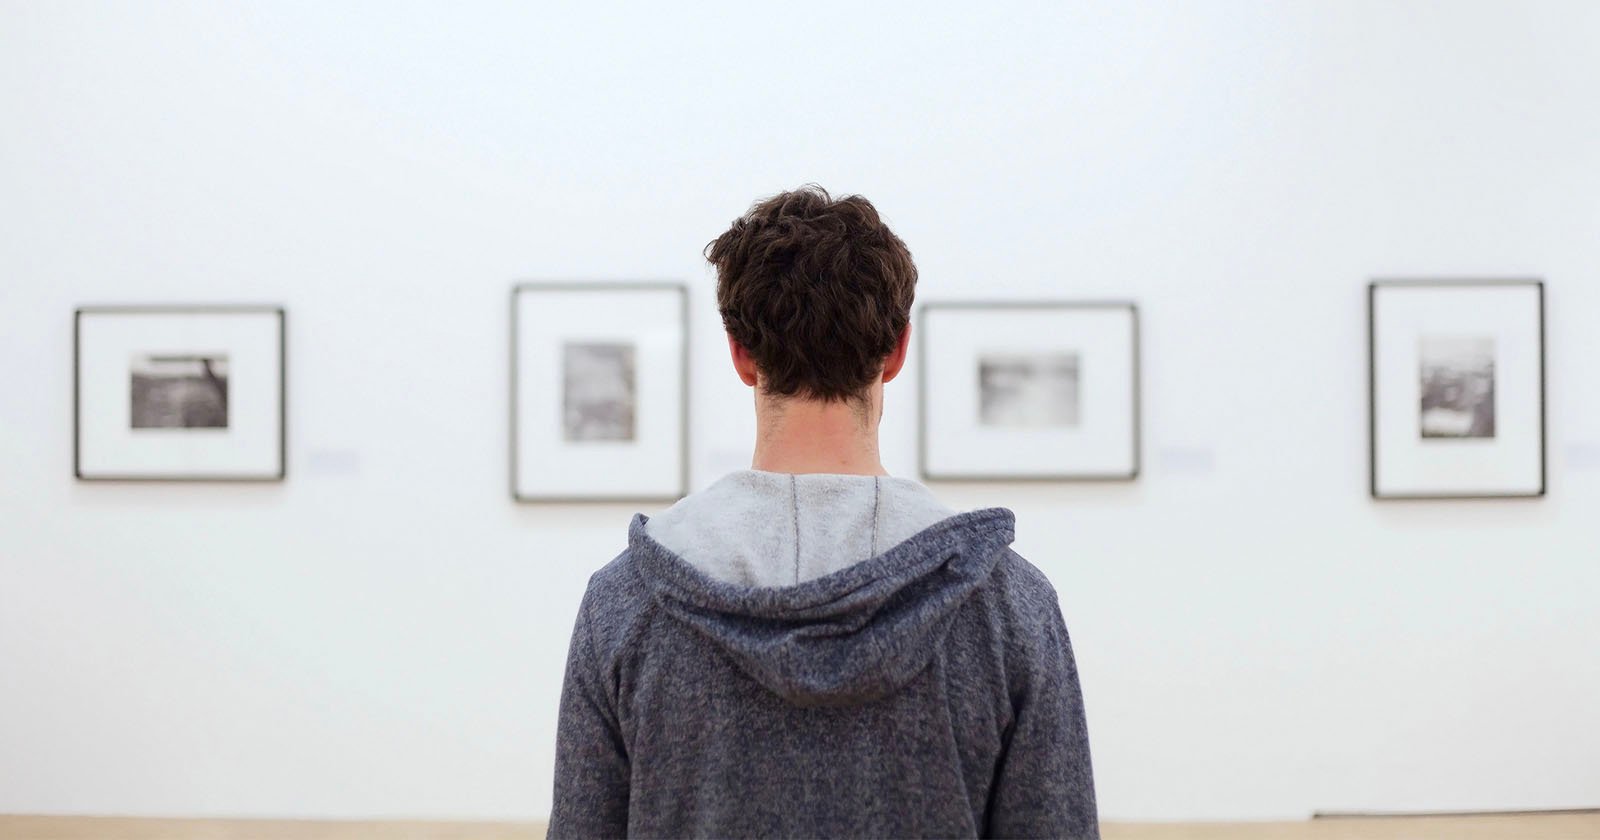 A man with curly hair, seen from behind, wearing a gray hoodie, viewing a series of framed black and white photographs on a white wall in an art gallery.